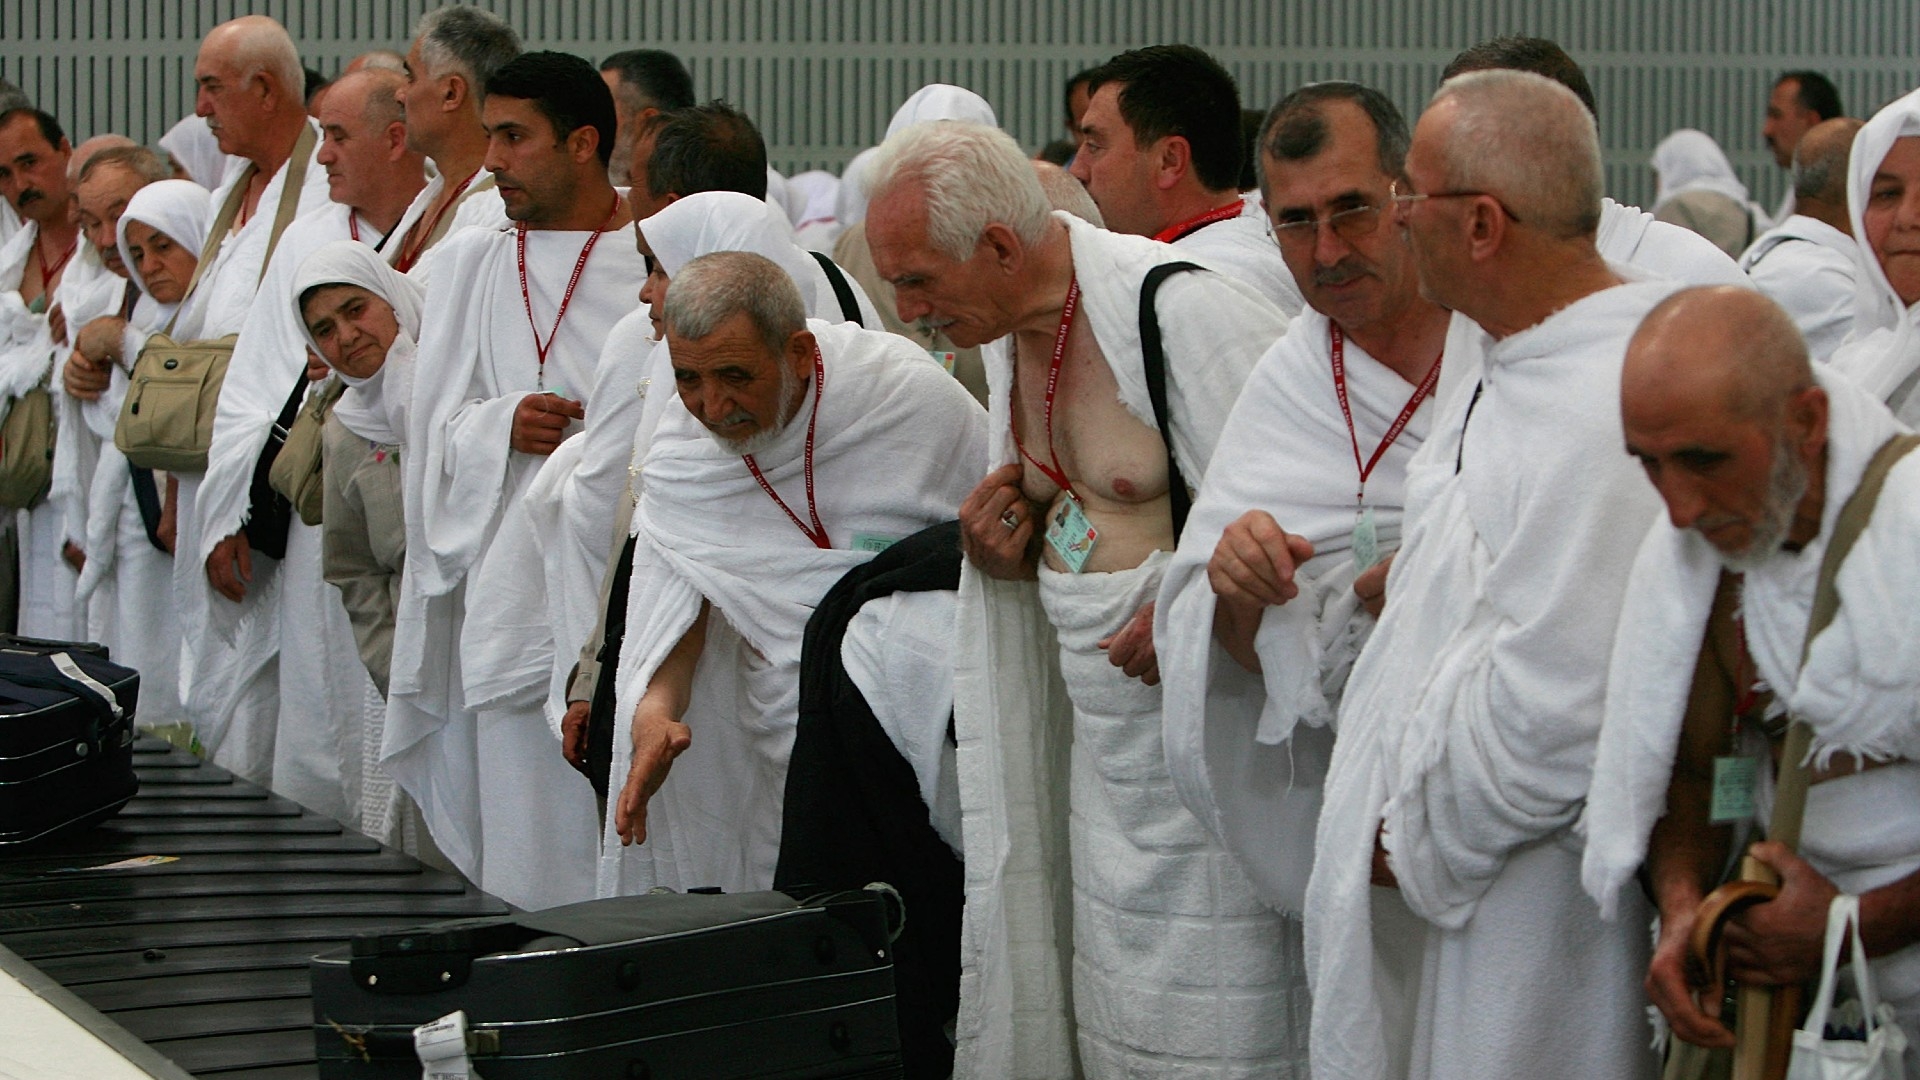 Muslim pilgrims wait to pick up their suitcases upon their arrival to King Abdul Aziz airport in Jeddah, Saudi Arabia on 27 November 2008 (AFP)